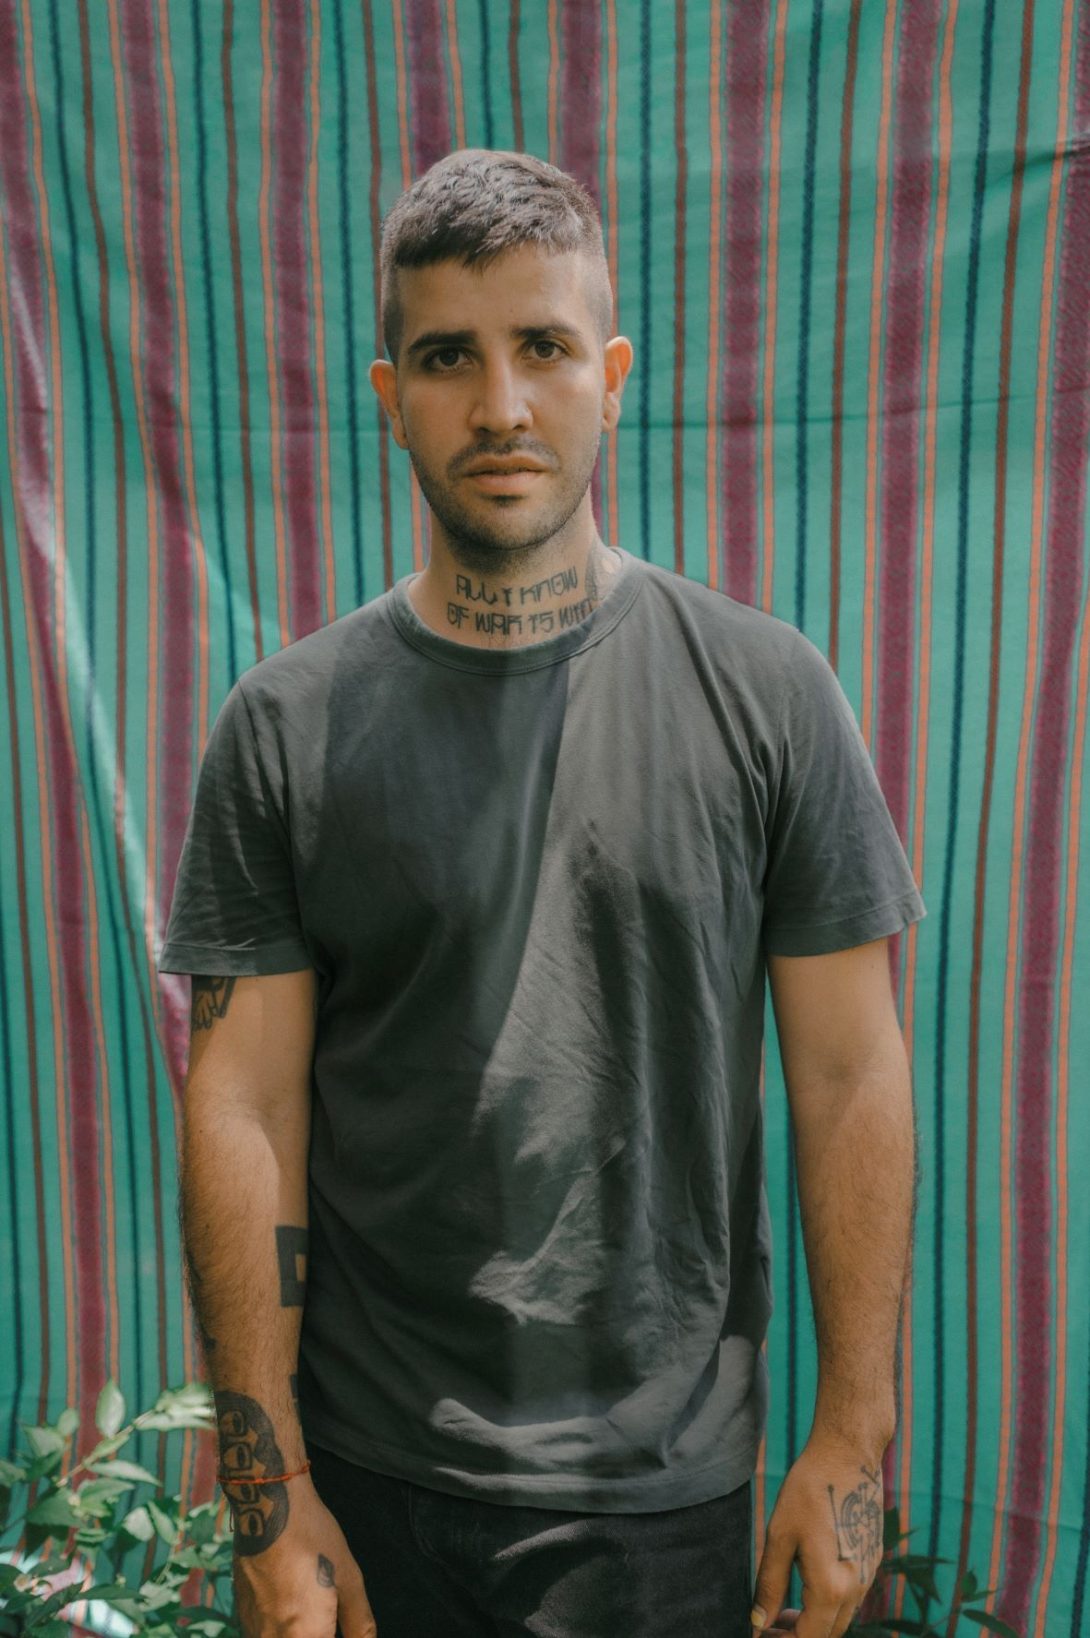 Man with tattoos stands in front of a green and maroon striped background.